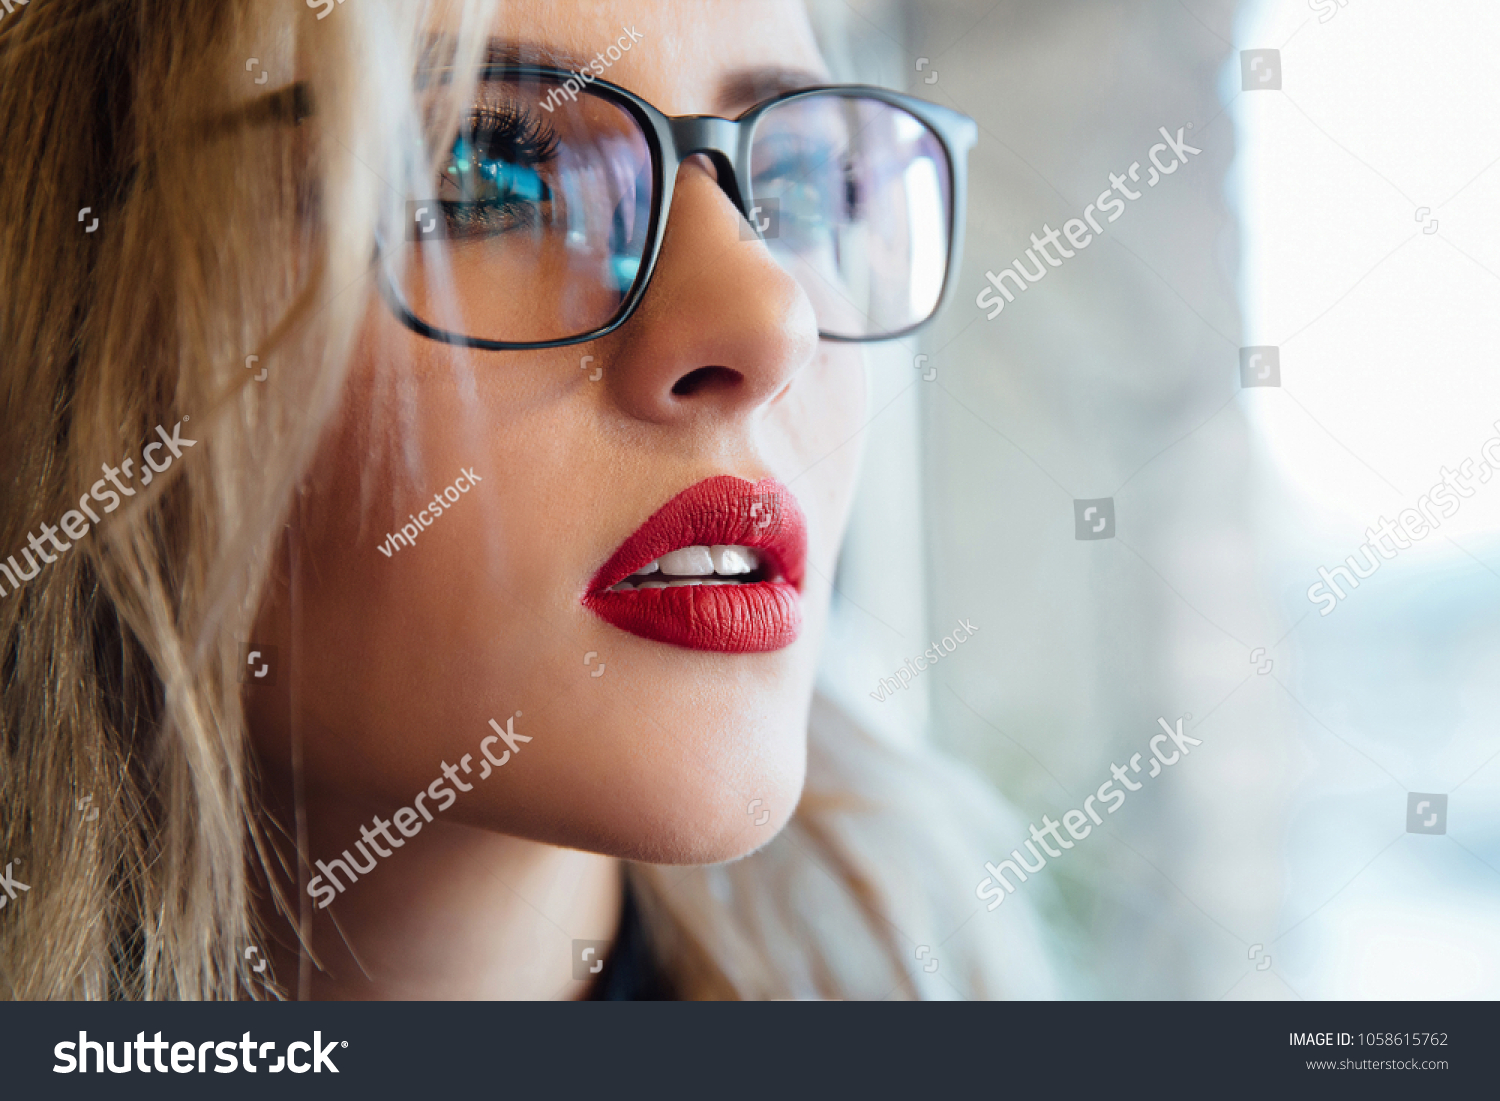 Glasses eyewear woman portrait looking away. Close up portrait of female business beautiful student woman model face. Blonde, red lips. Indoor. #1058615762